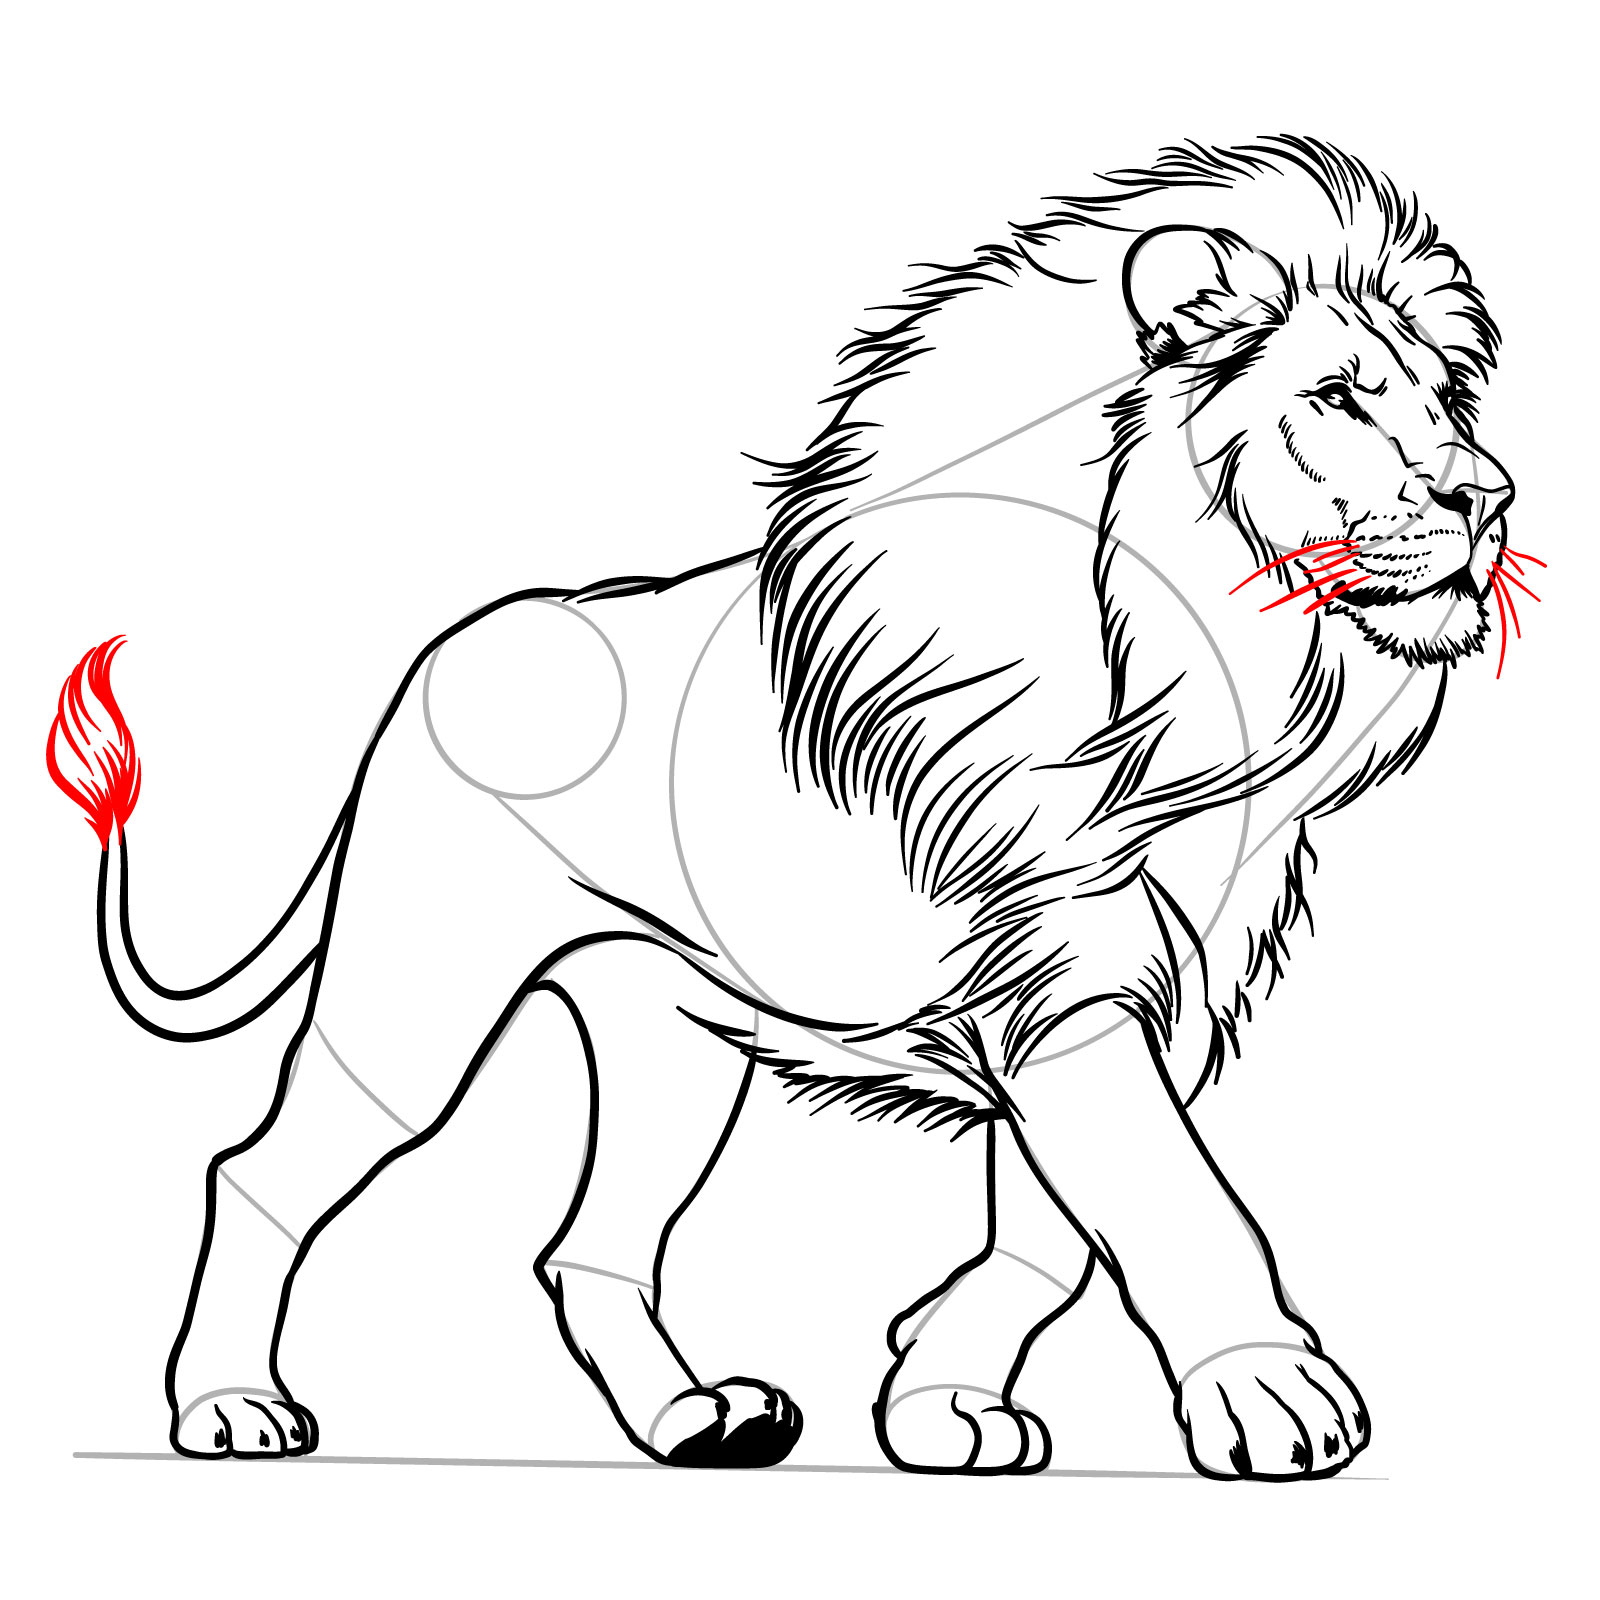 Adding the tuft and whiskers to a walking lion sketch - step 15